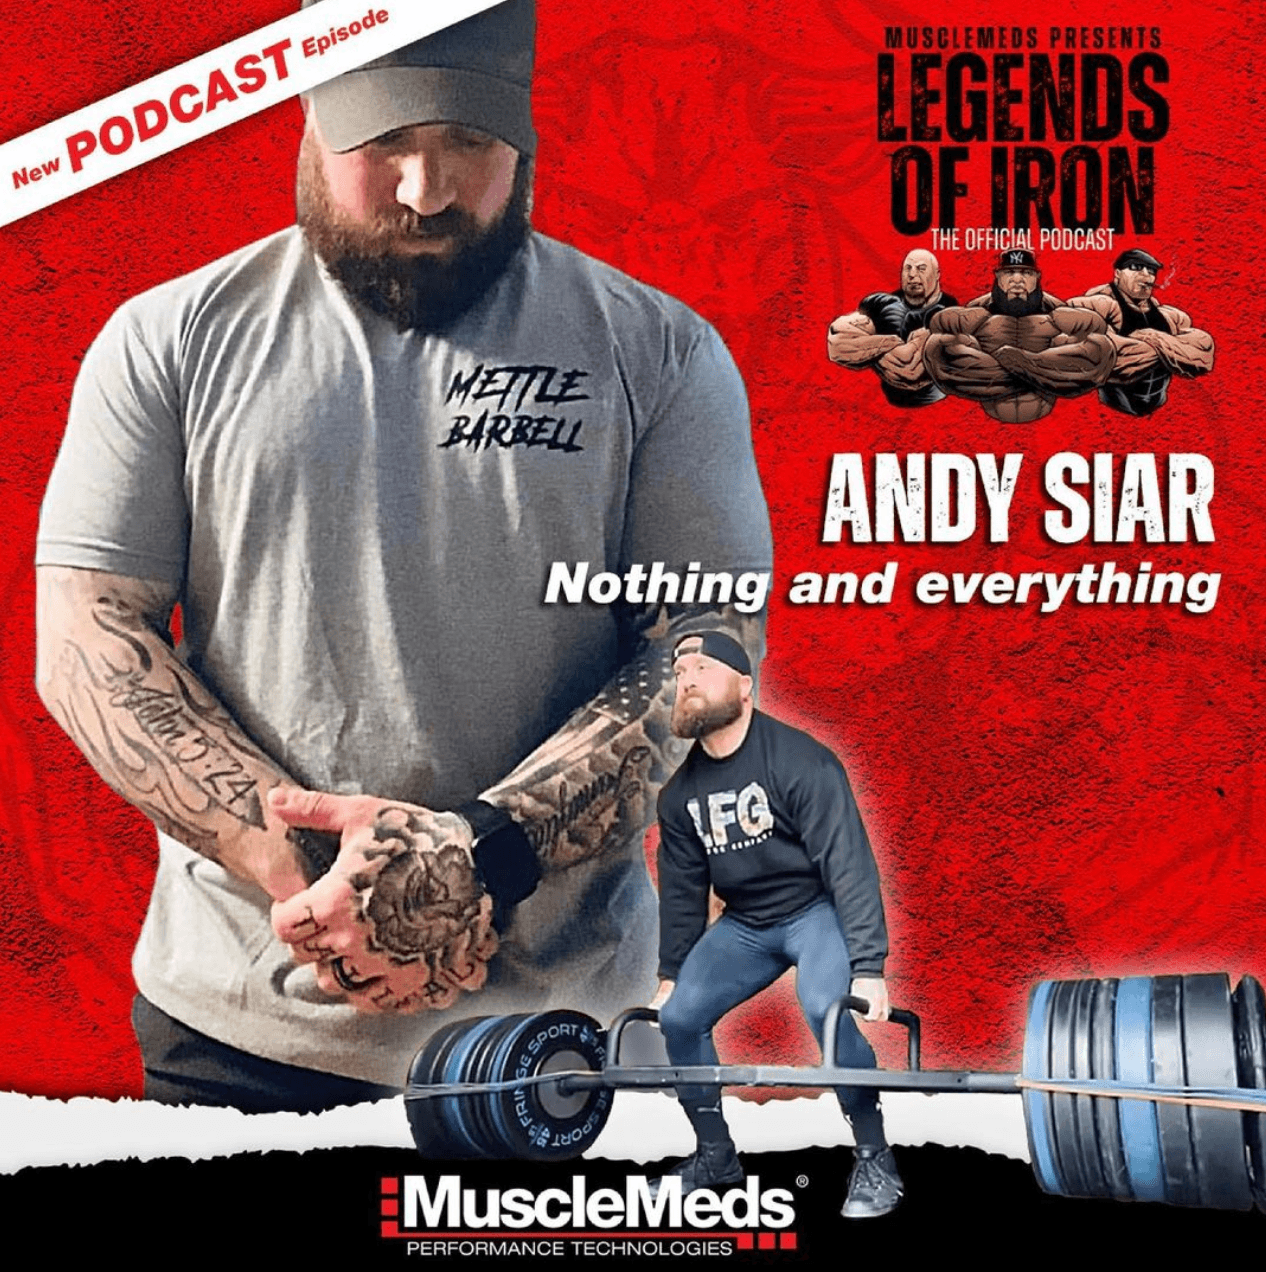 Legends of Iron - Andy Siar Nothing and Everything